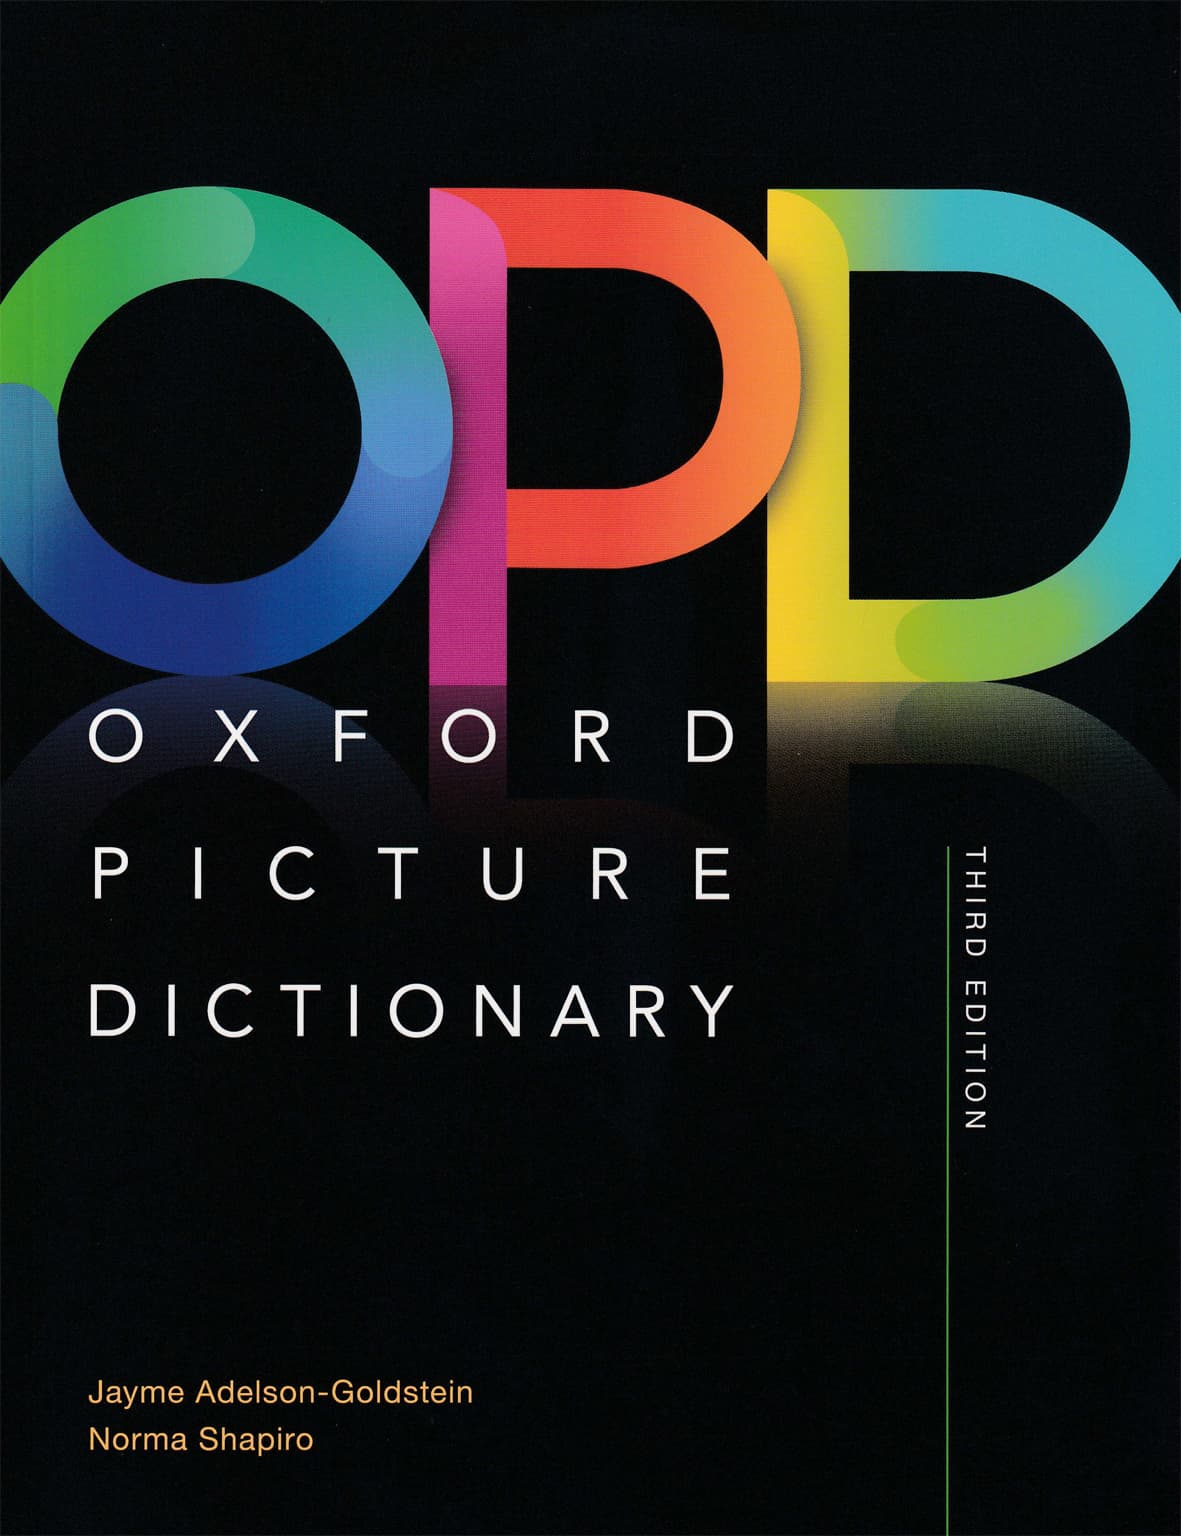 DK Today-Oxford Picture Dictionary Third Edition